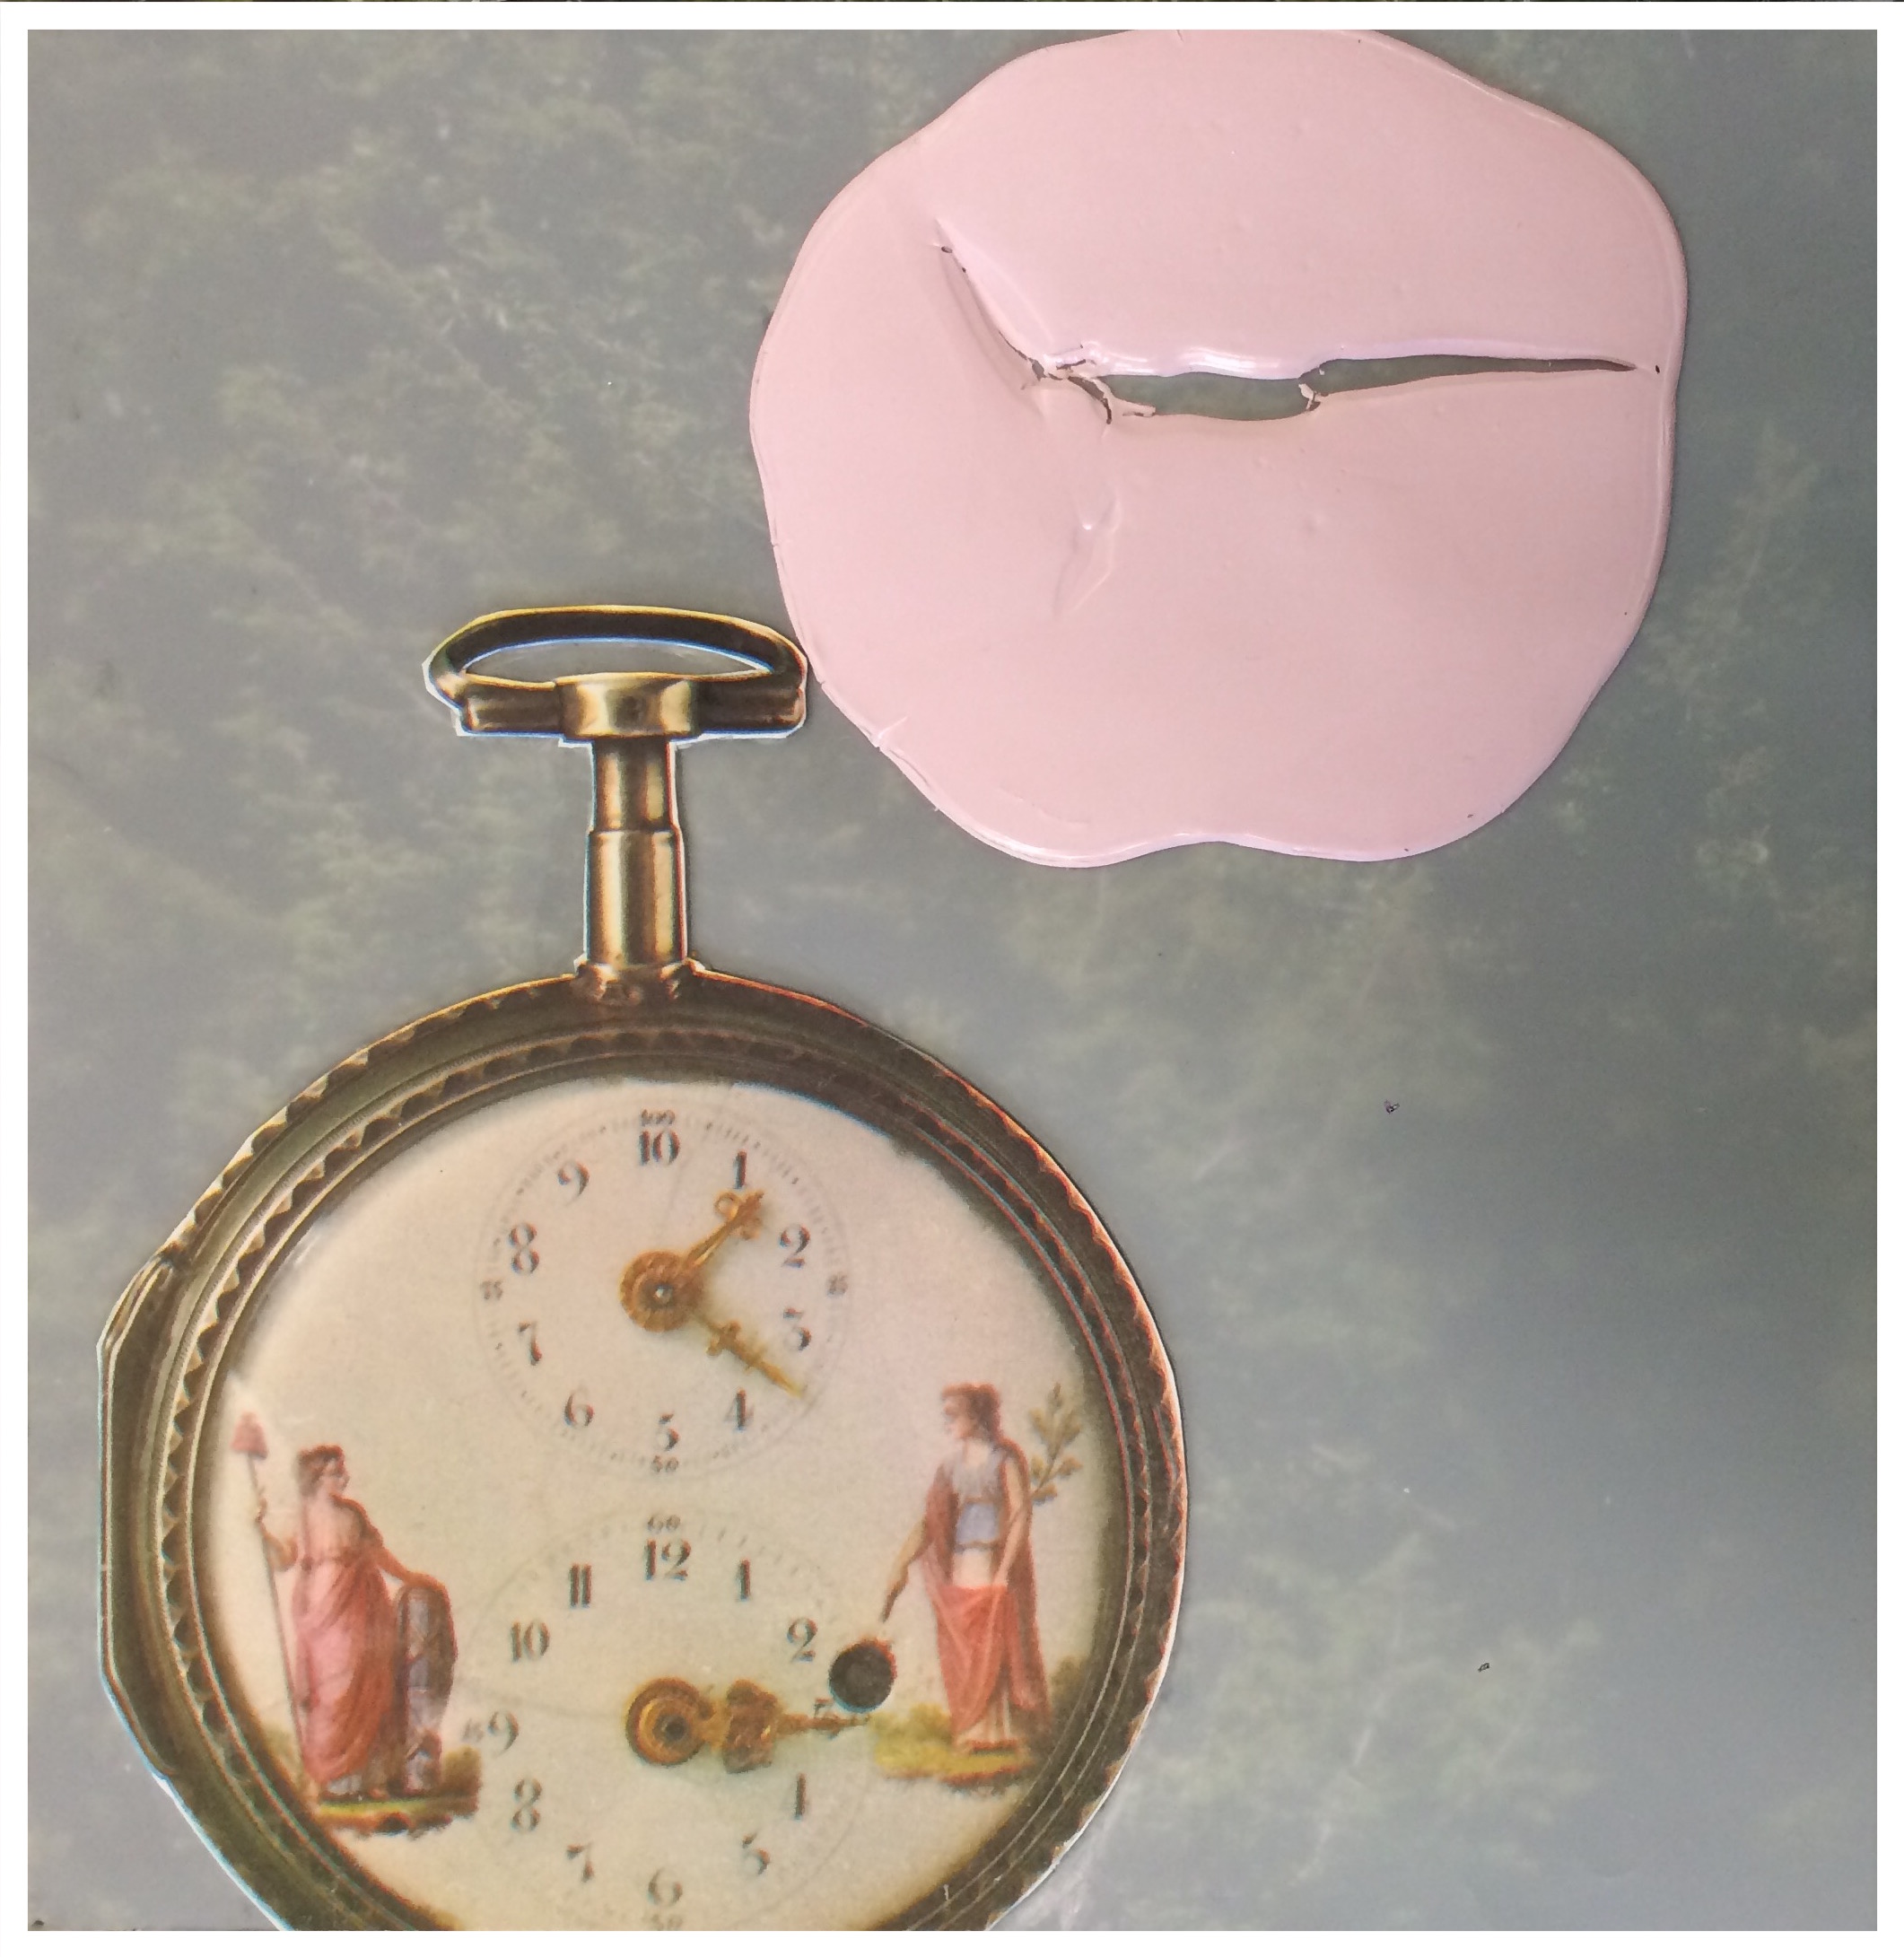 Stage of Time, 2015, hand-cut collage and latex on mylar, 8″x8″